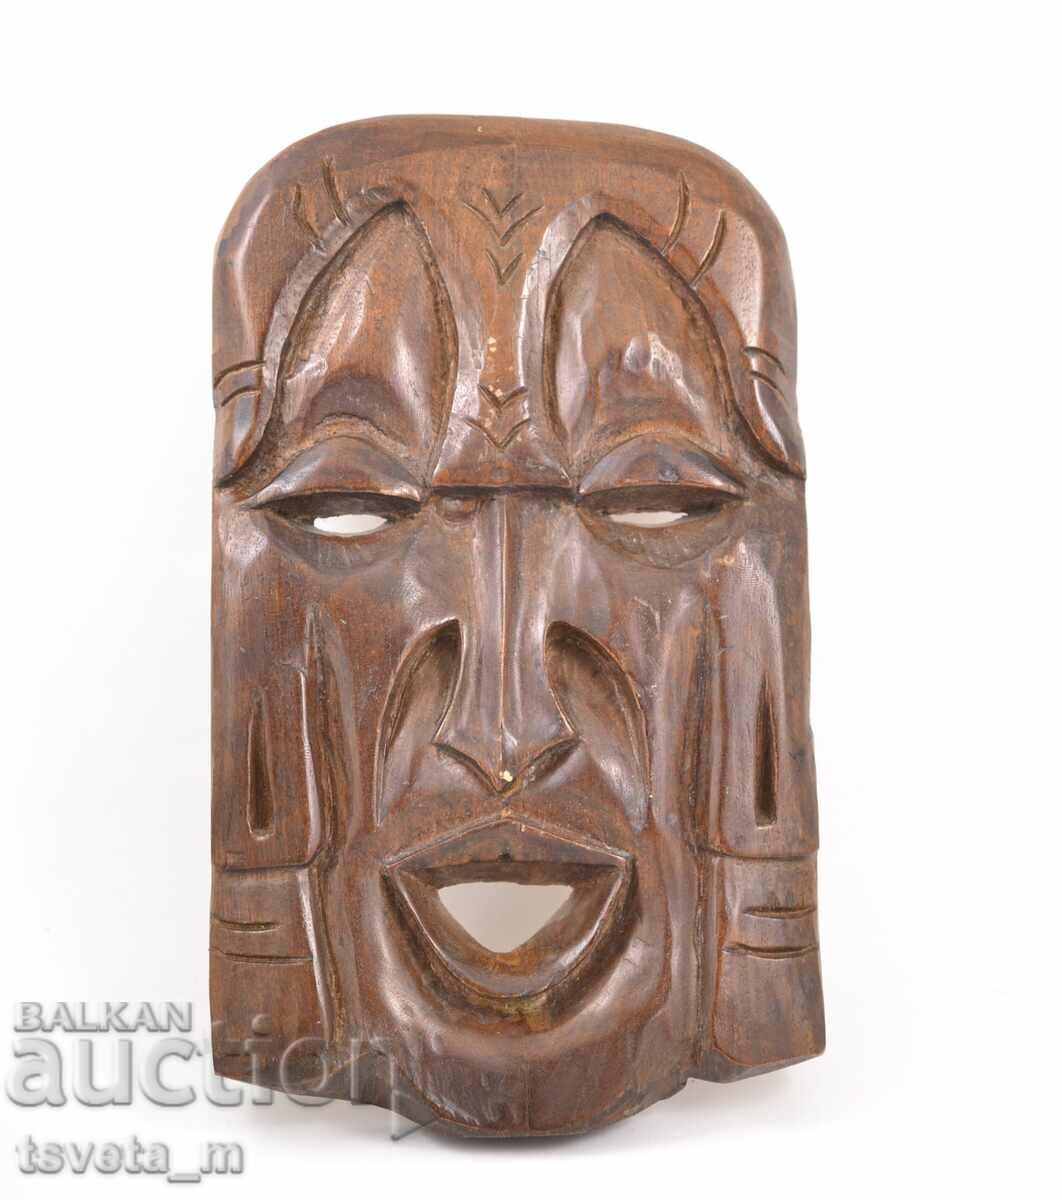 Wooden mask, wood carving